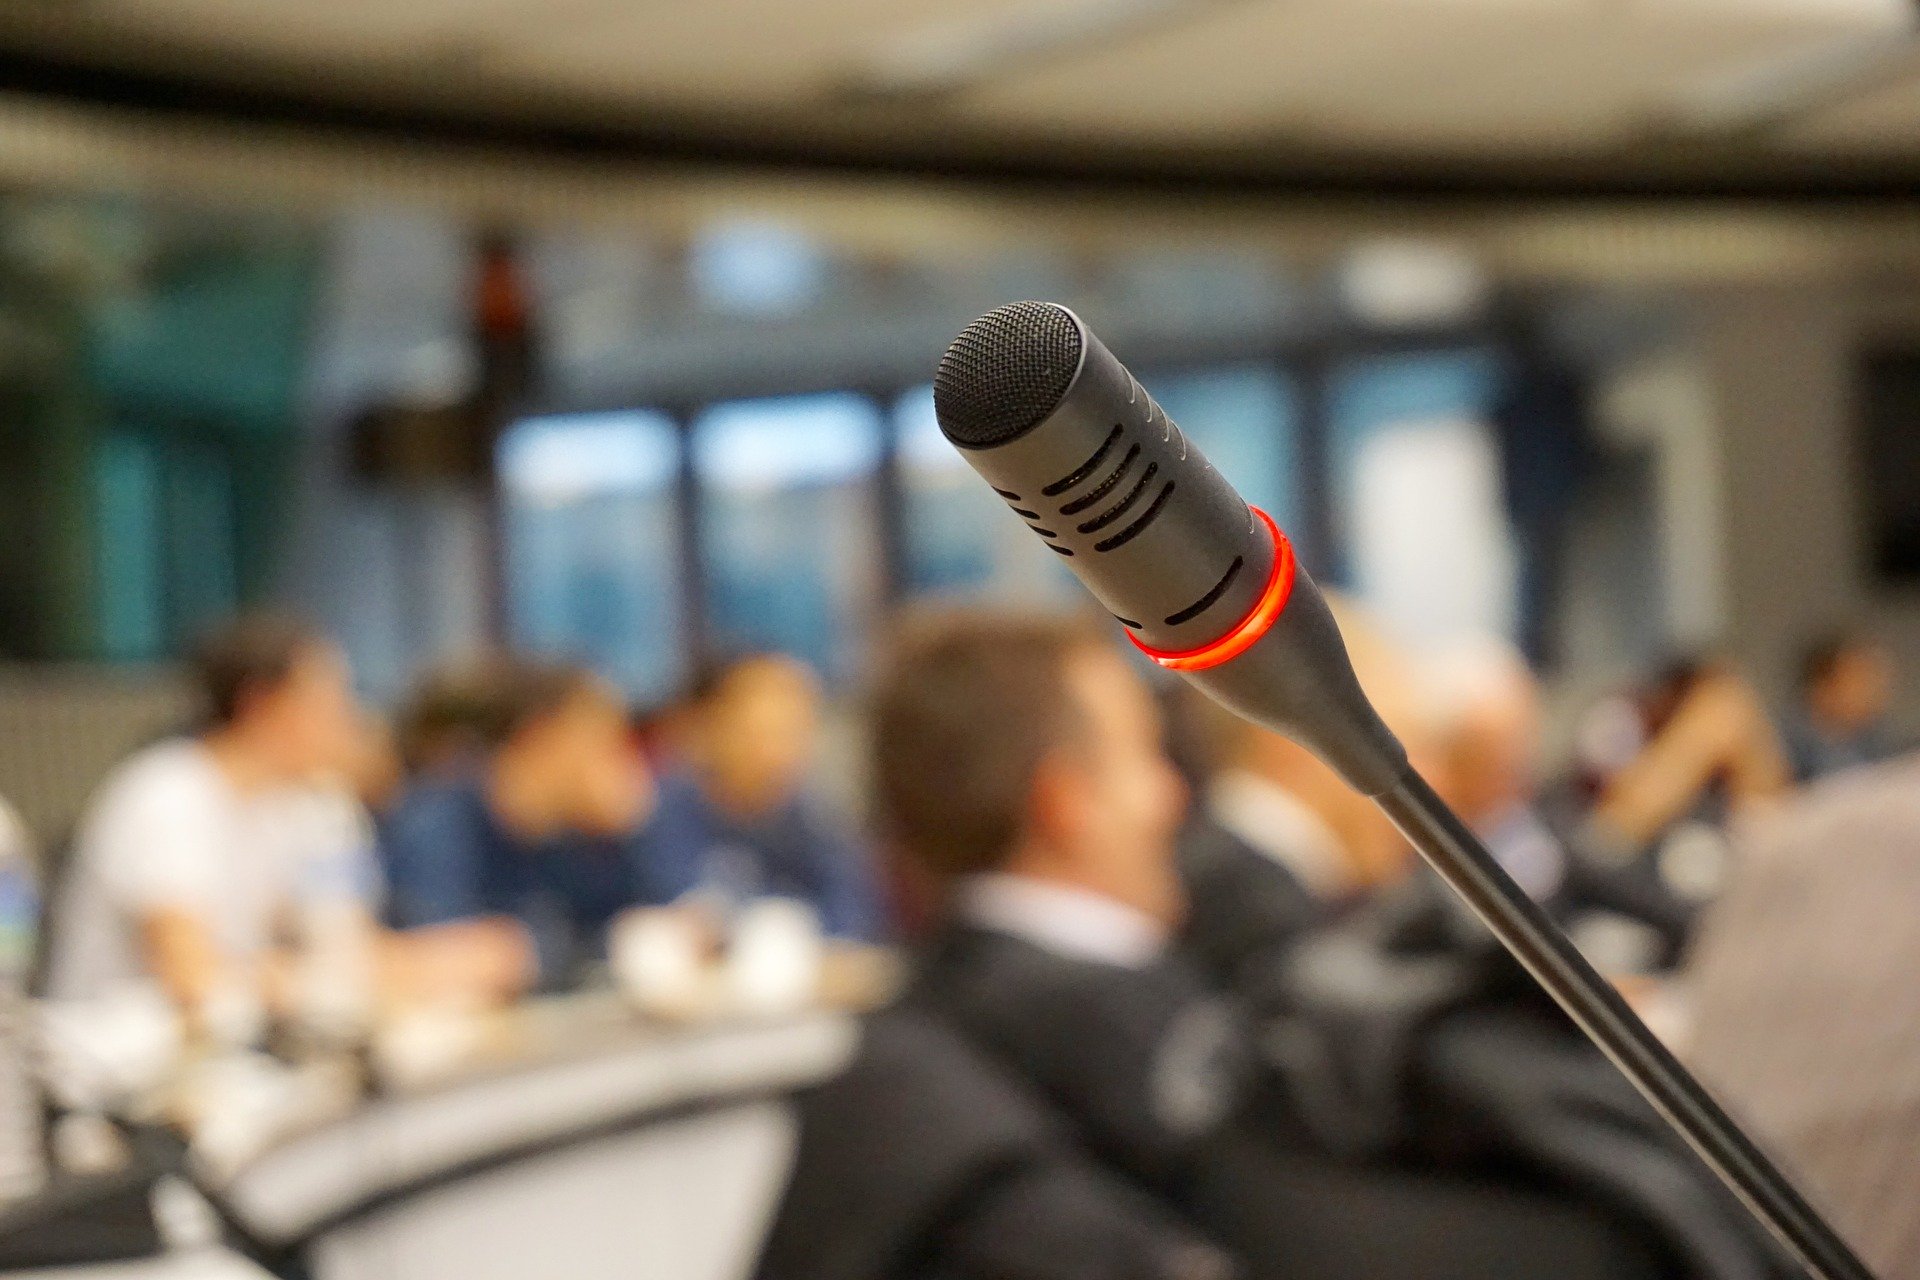 Getting the best out of a media conference - BlueSky's top 5 tips